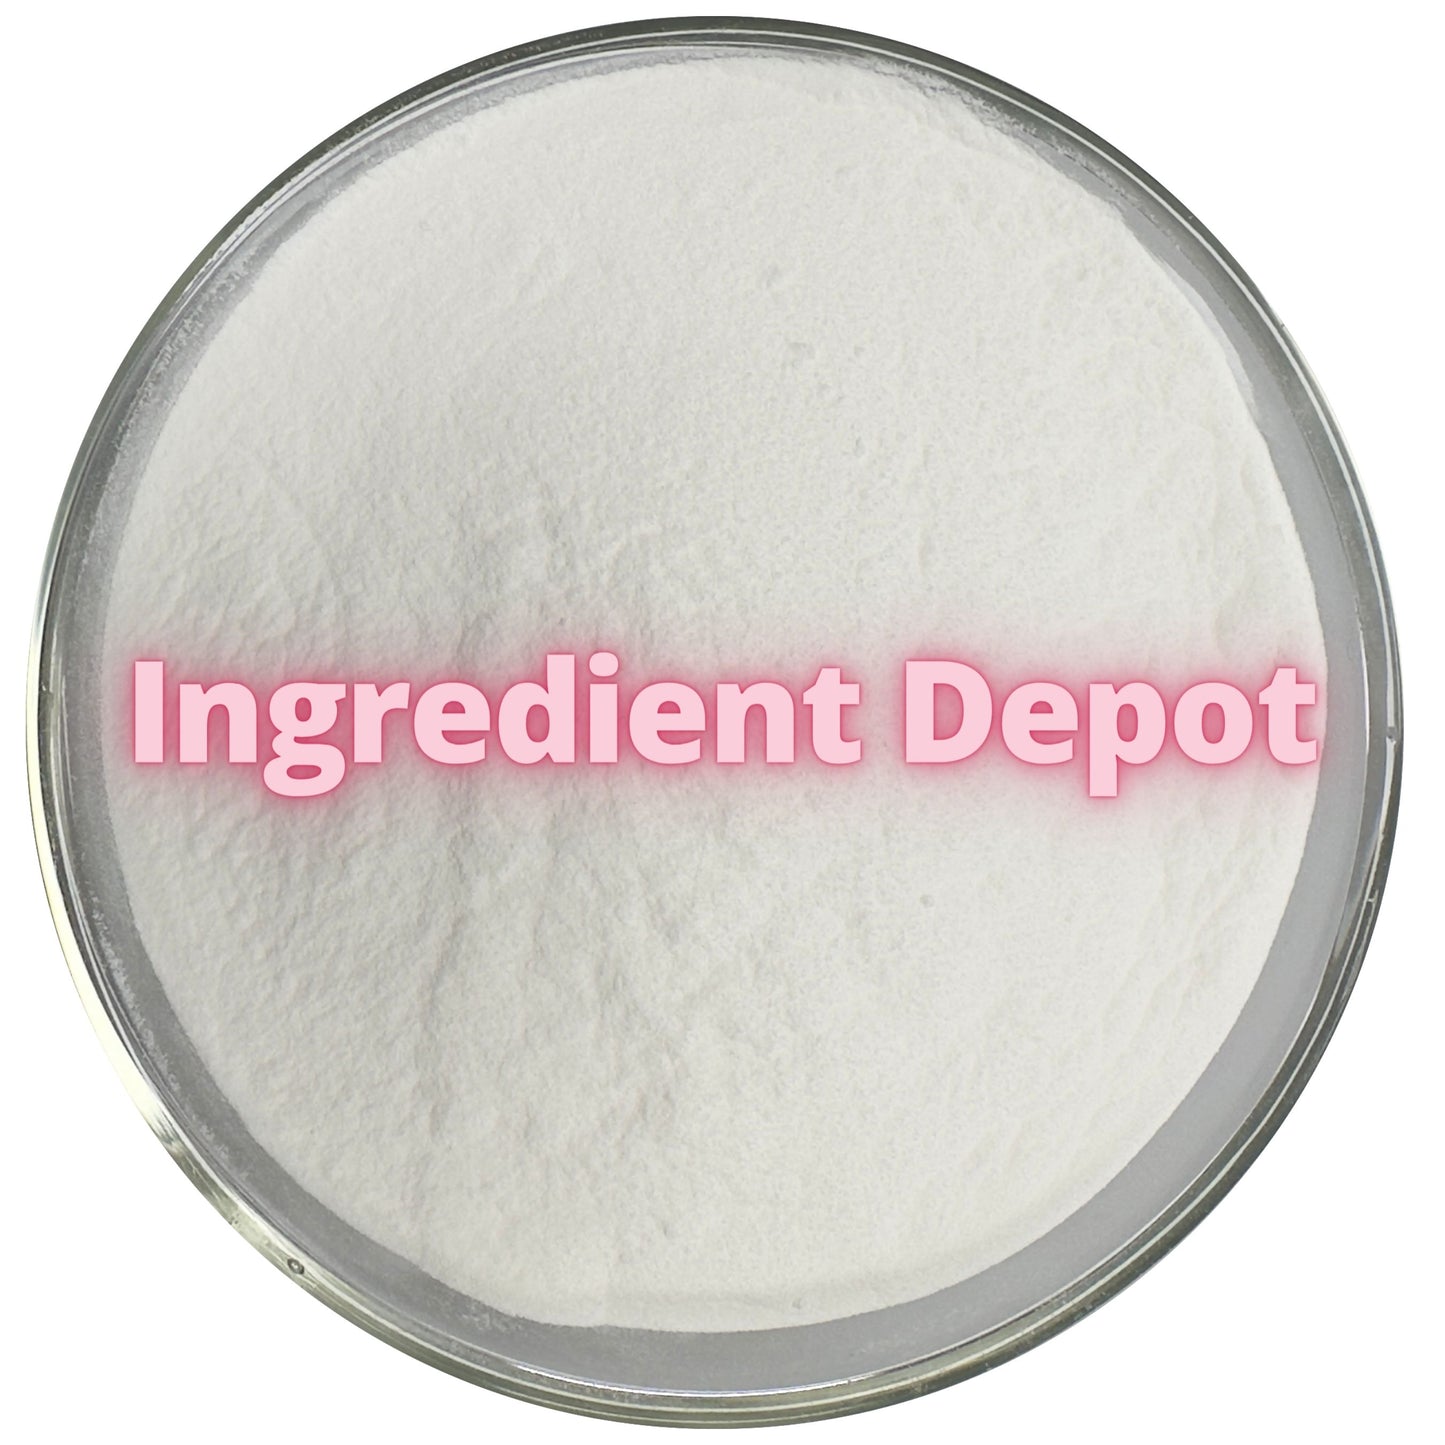 SMCC 90 Silicified Microcrystalline Cellulose - USP/NF Grade 10 kgs - Ingredient Depot